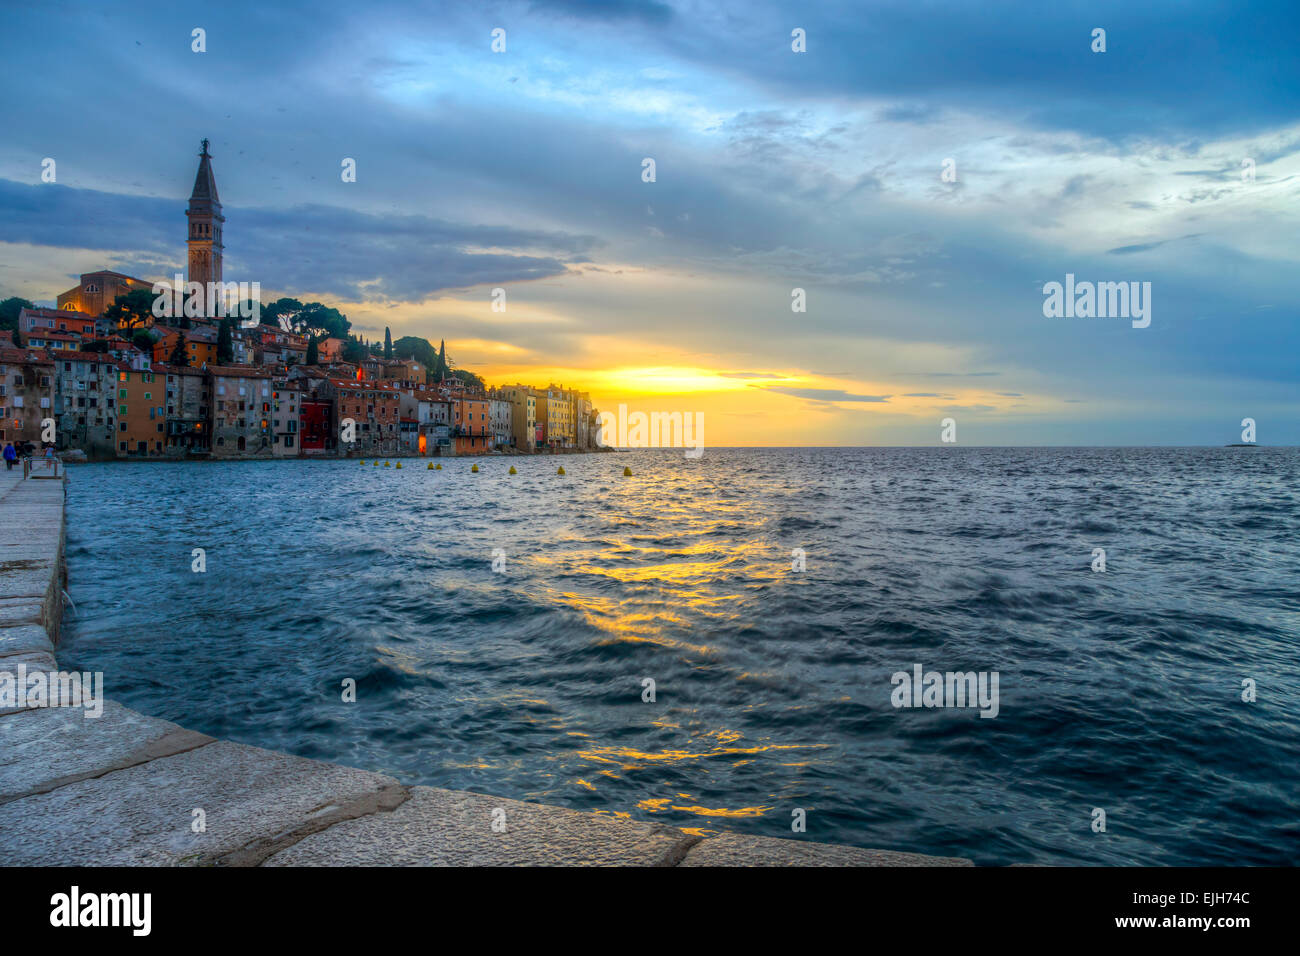 Rovinj old town at night in Adriatic sea coast of Croatia, Europe. This image make HDR technique Stock Photo